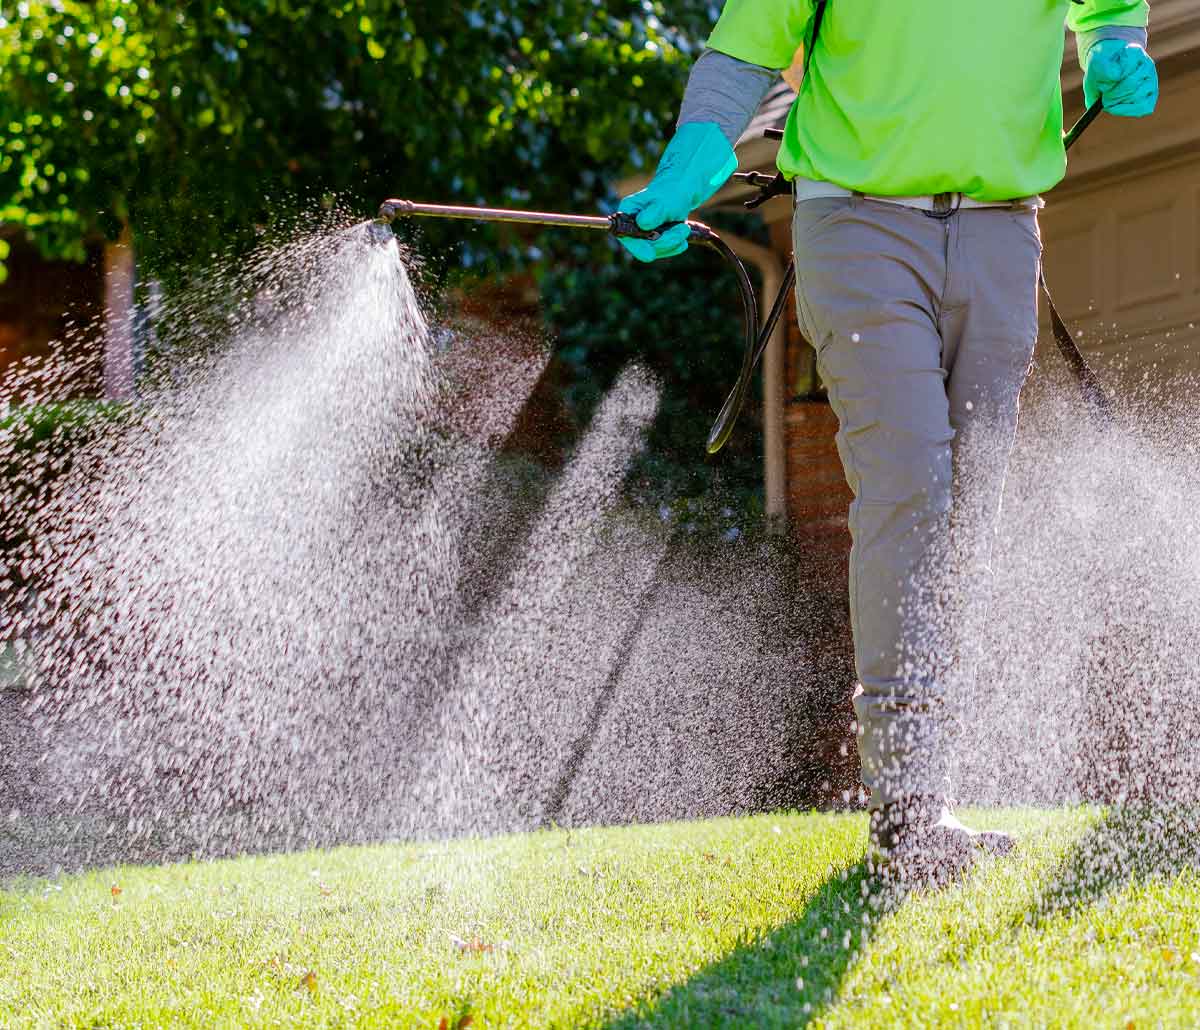 image of pearce lawn care employee spraying a lawn